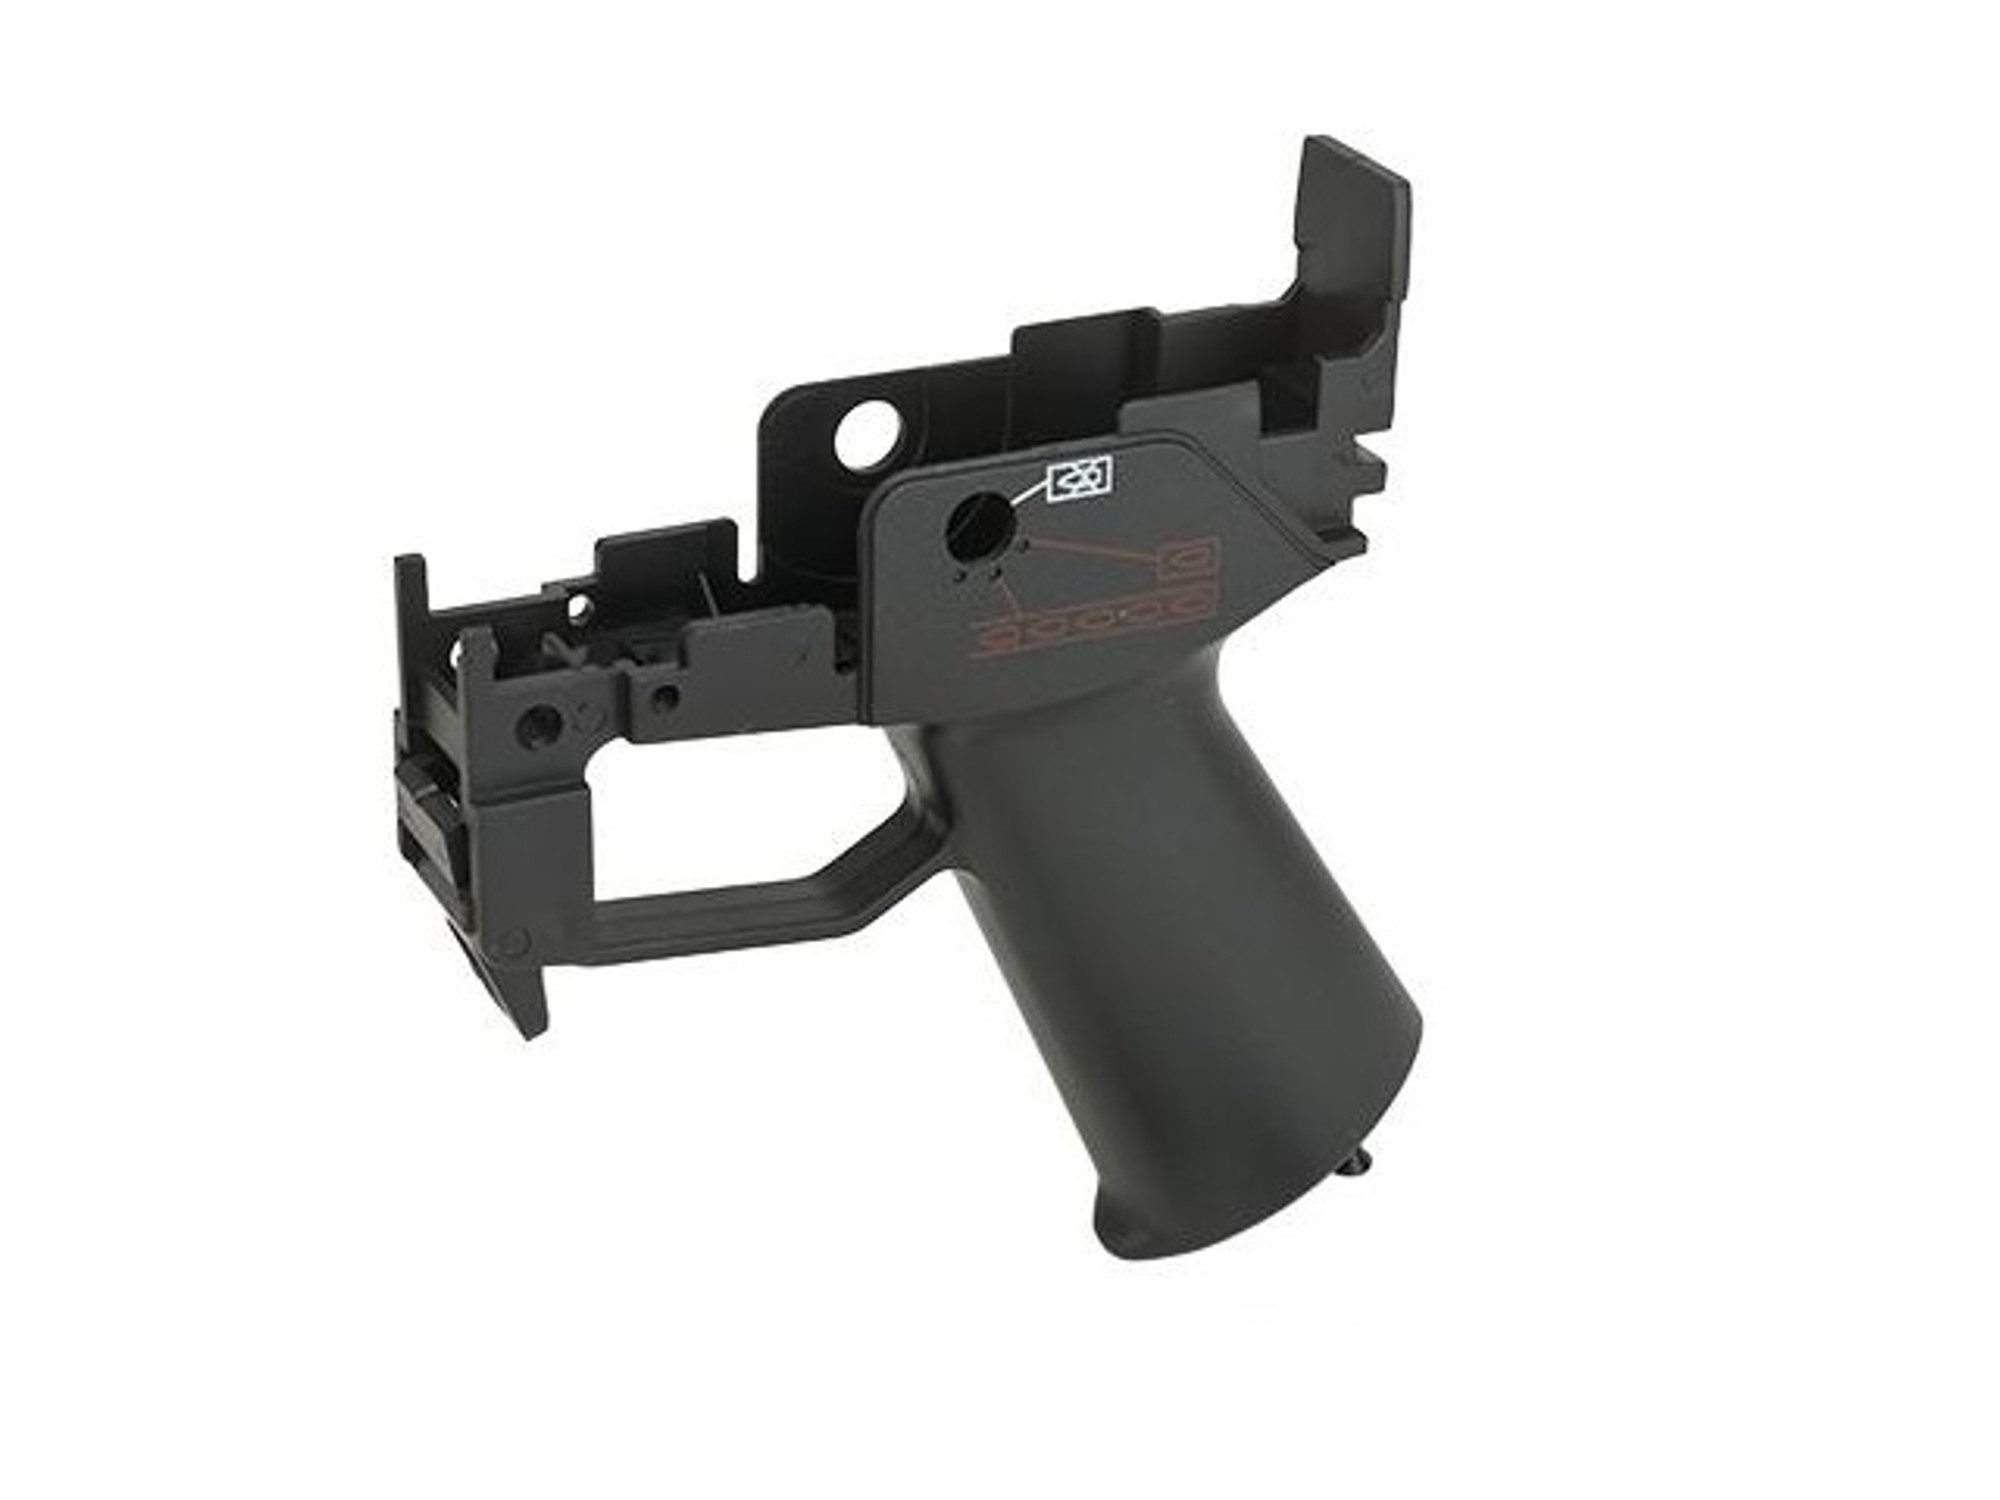 JG Replacement Grip and Magazine Catch Assembly for G36 Series Airsoft AEG Rifles - Black
